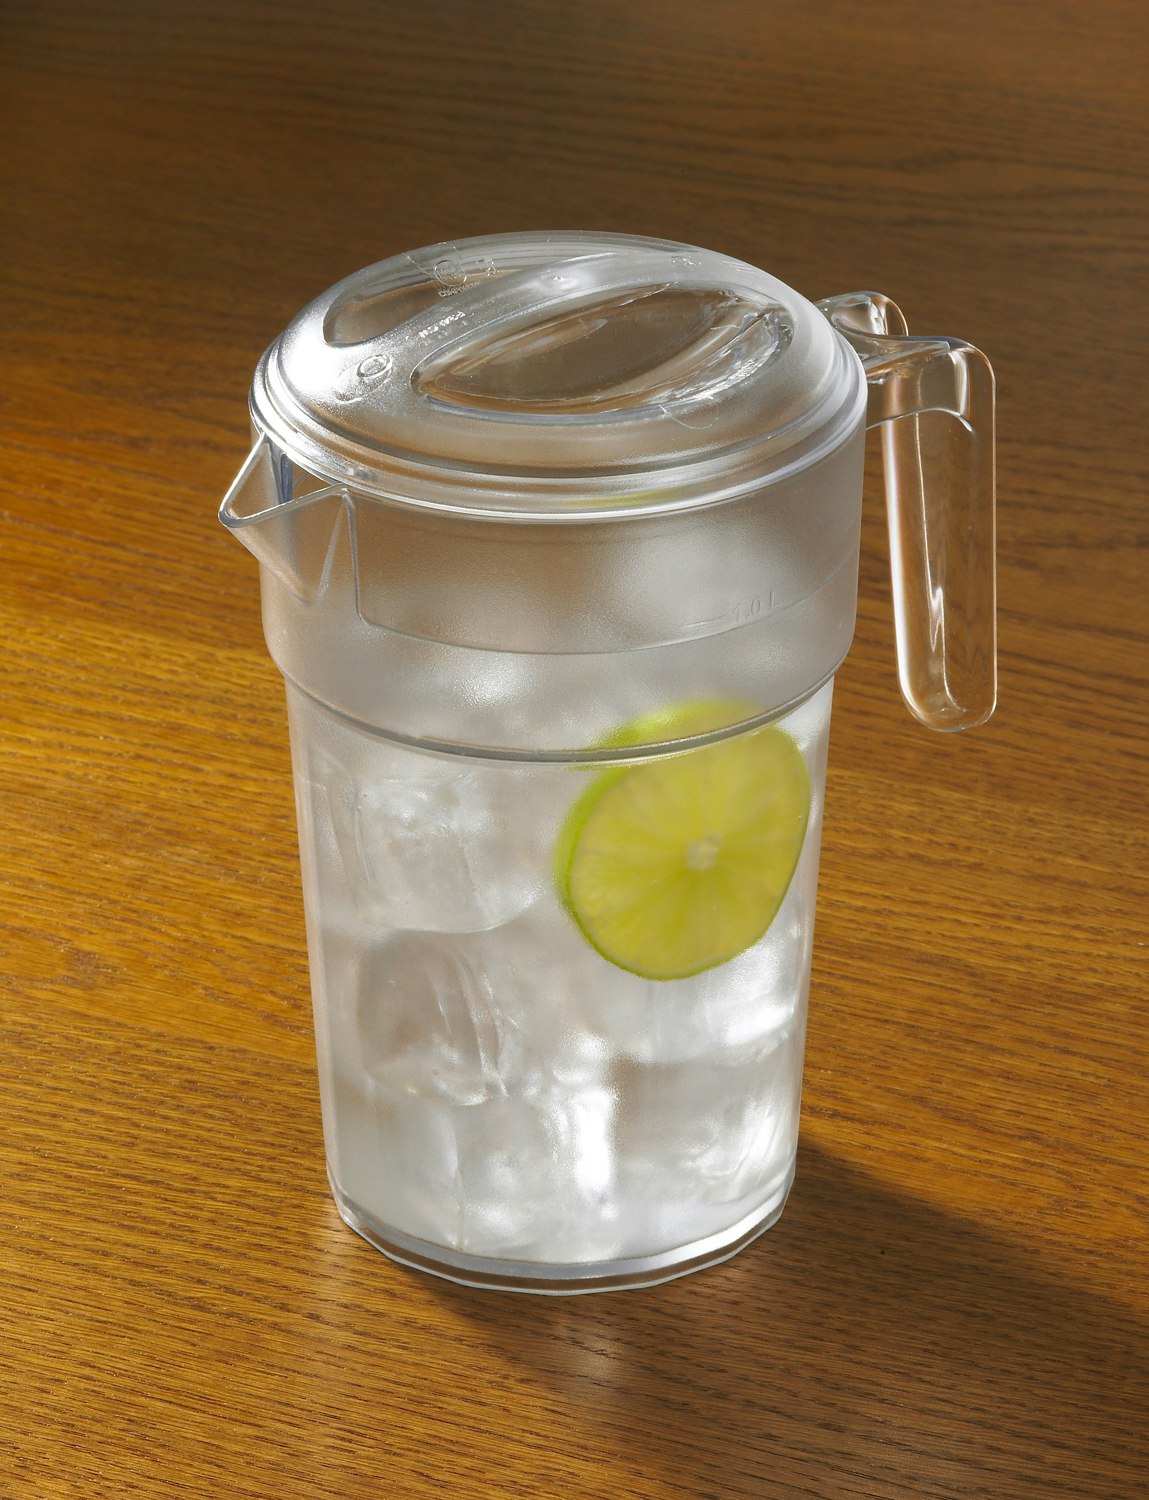 Service Ideas WP1CH Polished S/S 1 Liter Insulated Pitcher